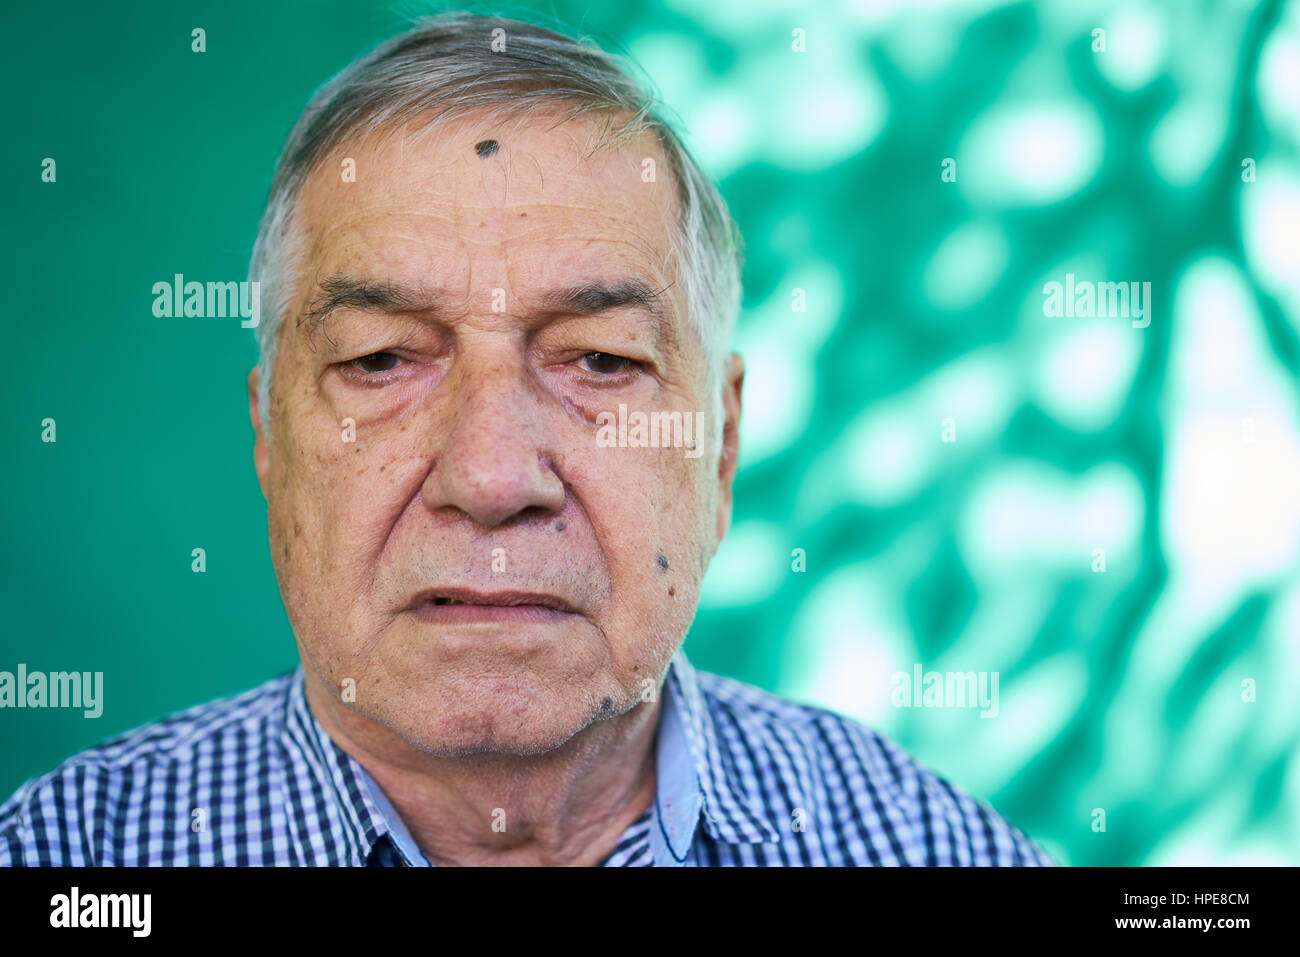 Real Cuban people and emotions, portrait of sad mature latino man from Havana, Cuba looking at camera with worried face and depressed expression Stock Photo